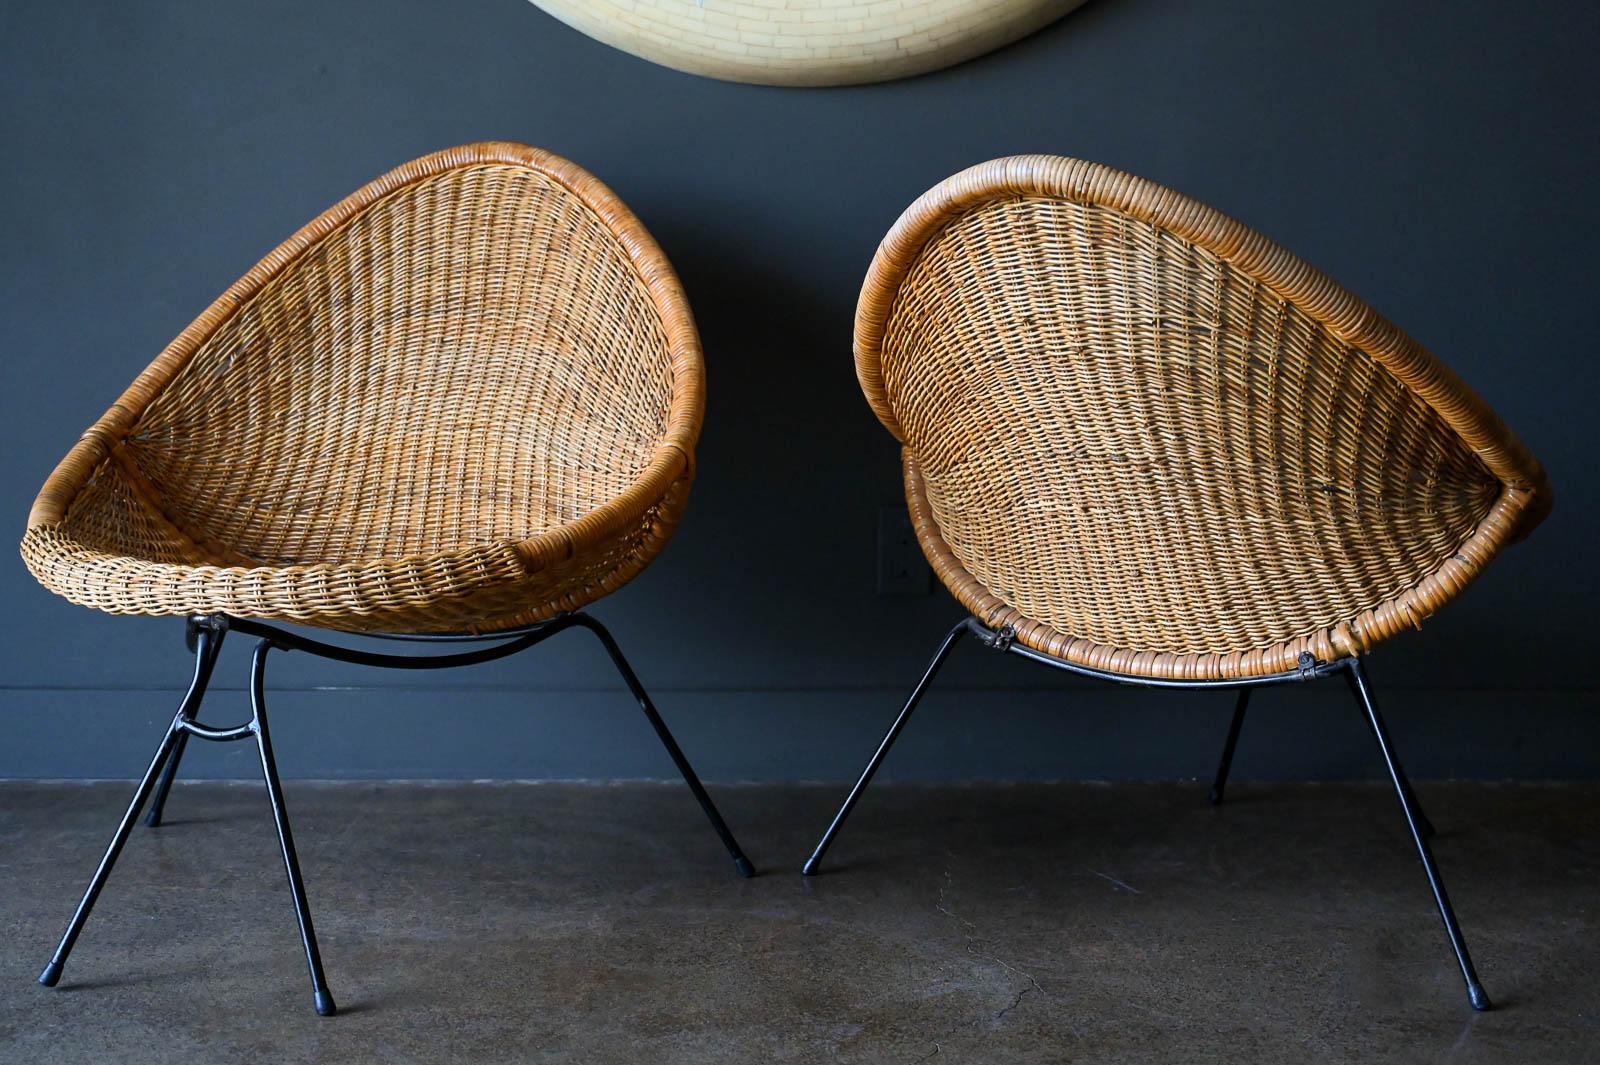 Vintage Italian Rattan and iron scoop chairs and table, ca. 1950. Beautiful and unique teardrop chair design with original frames, feet and rattan in good vintage condition. From prominent estate in Southern California, family lived in Italy and